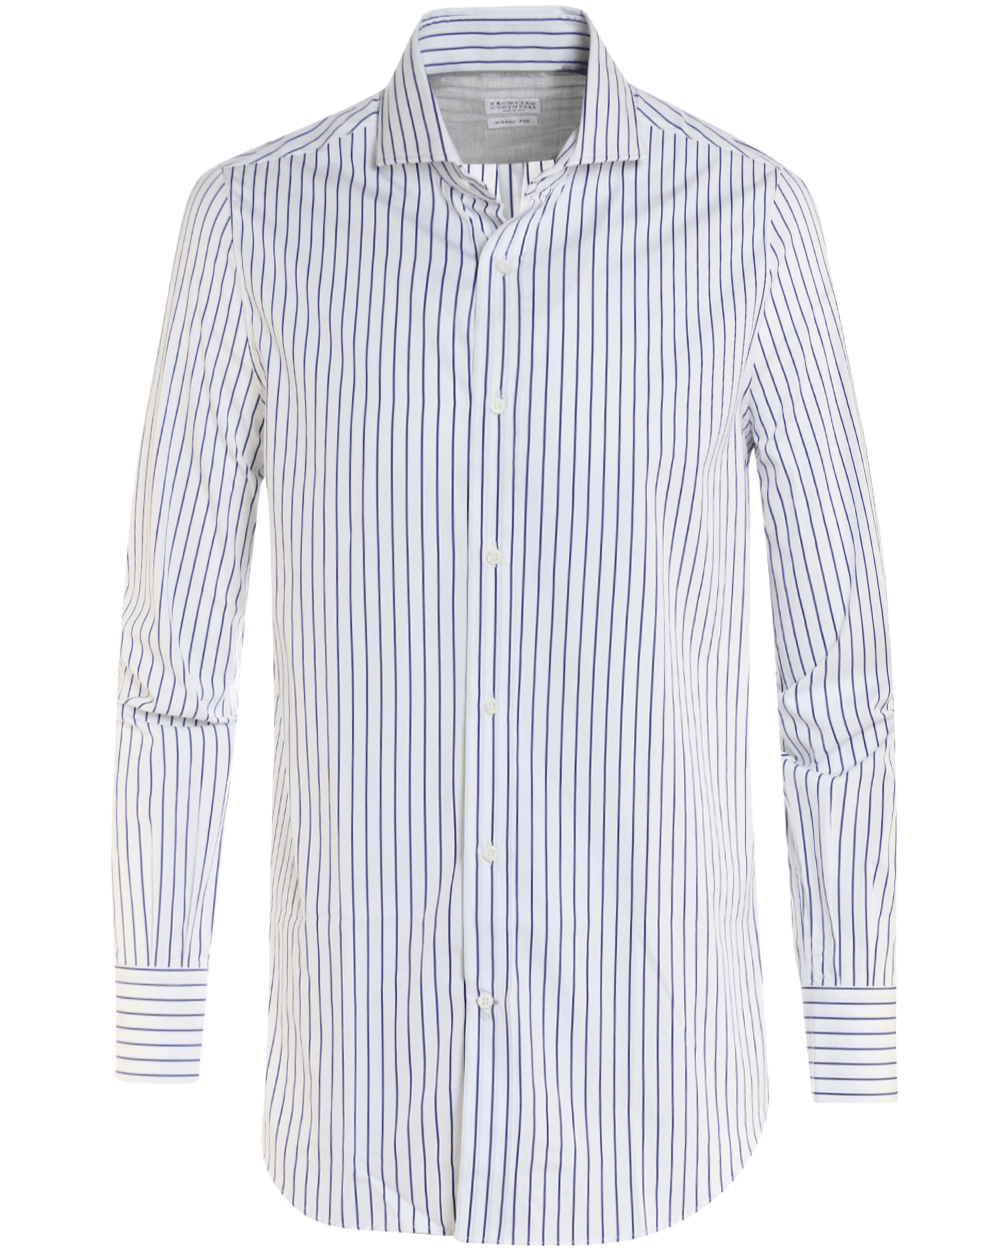 White and Blue Wide Pin Striped Cotton Sportshirt